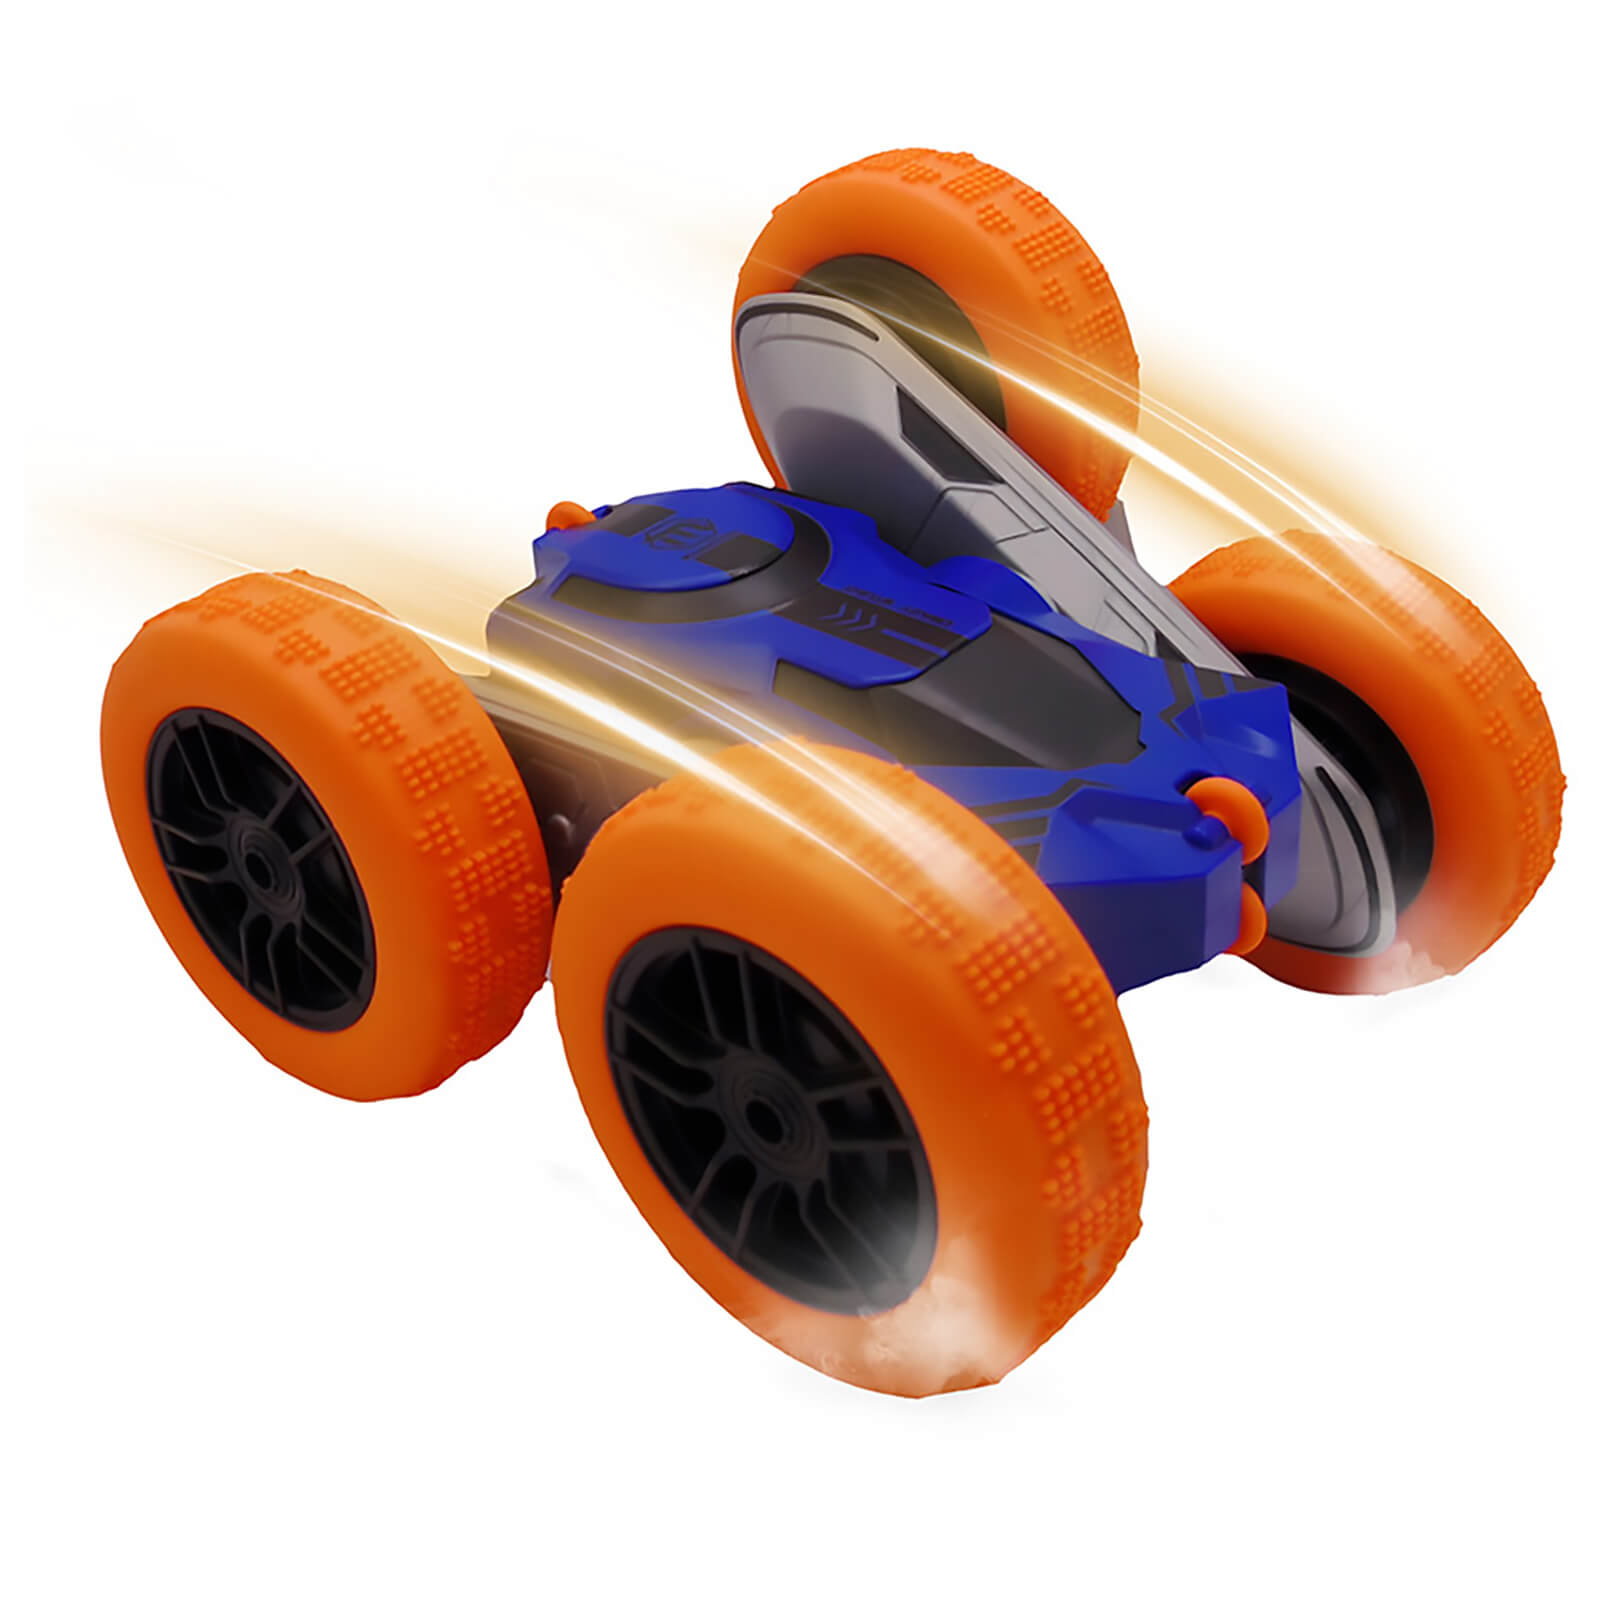 Image of Remote Control 360 Stunt Buggy